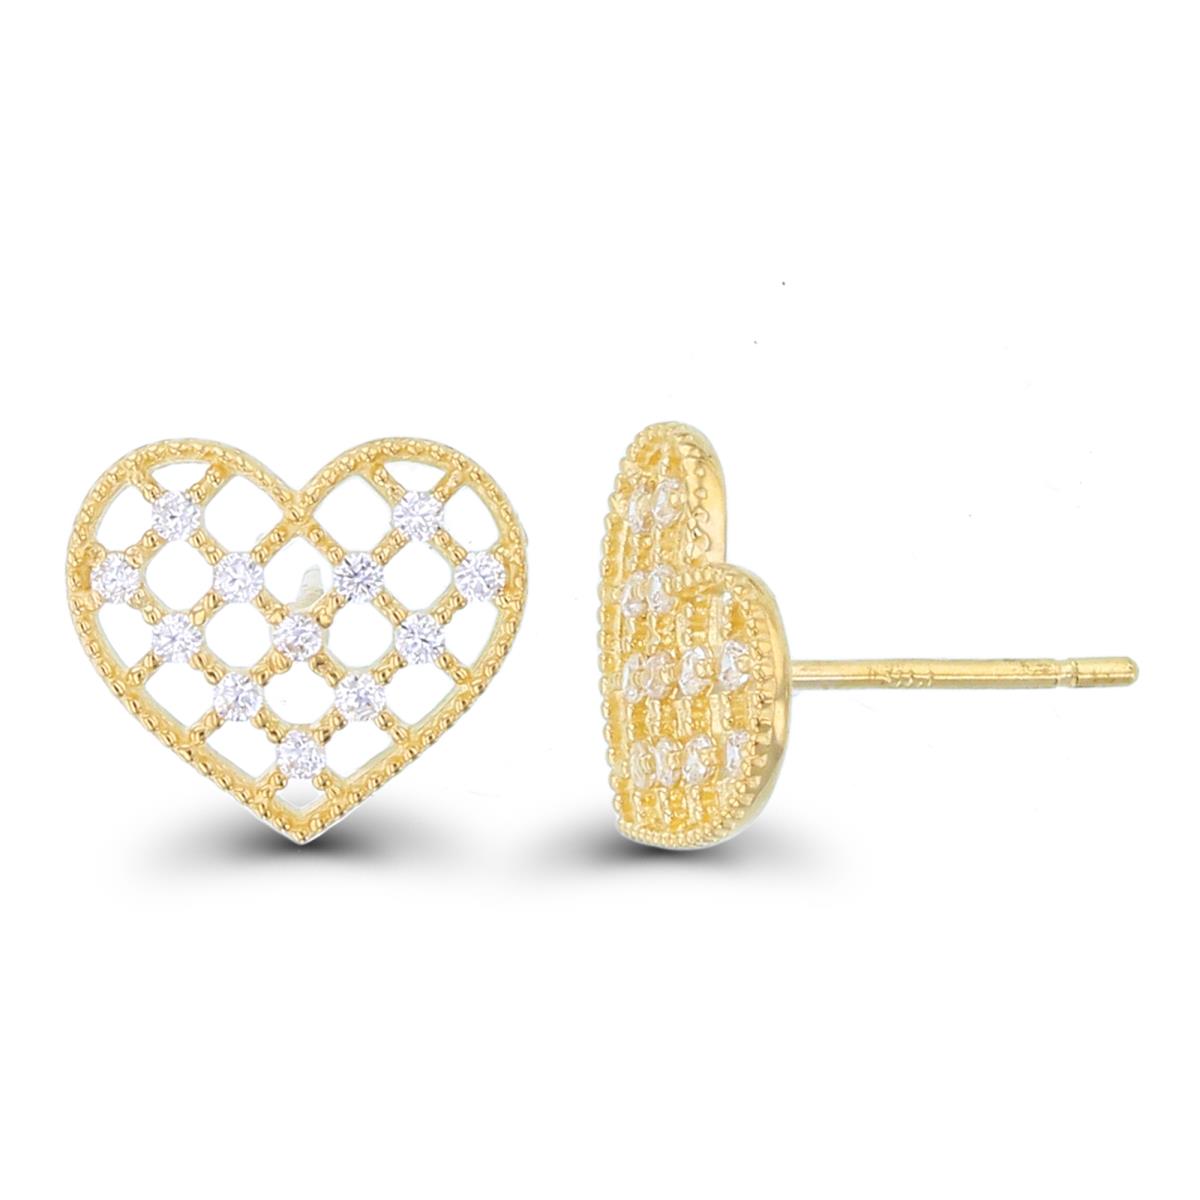 14K Yellow Gold Rnd CZ Scattered Milgrain Heart Studs with Silicon Backs